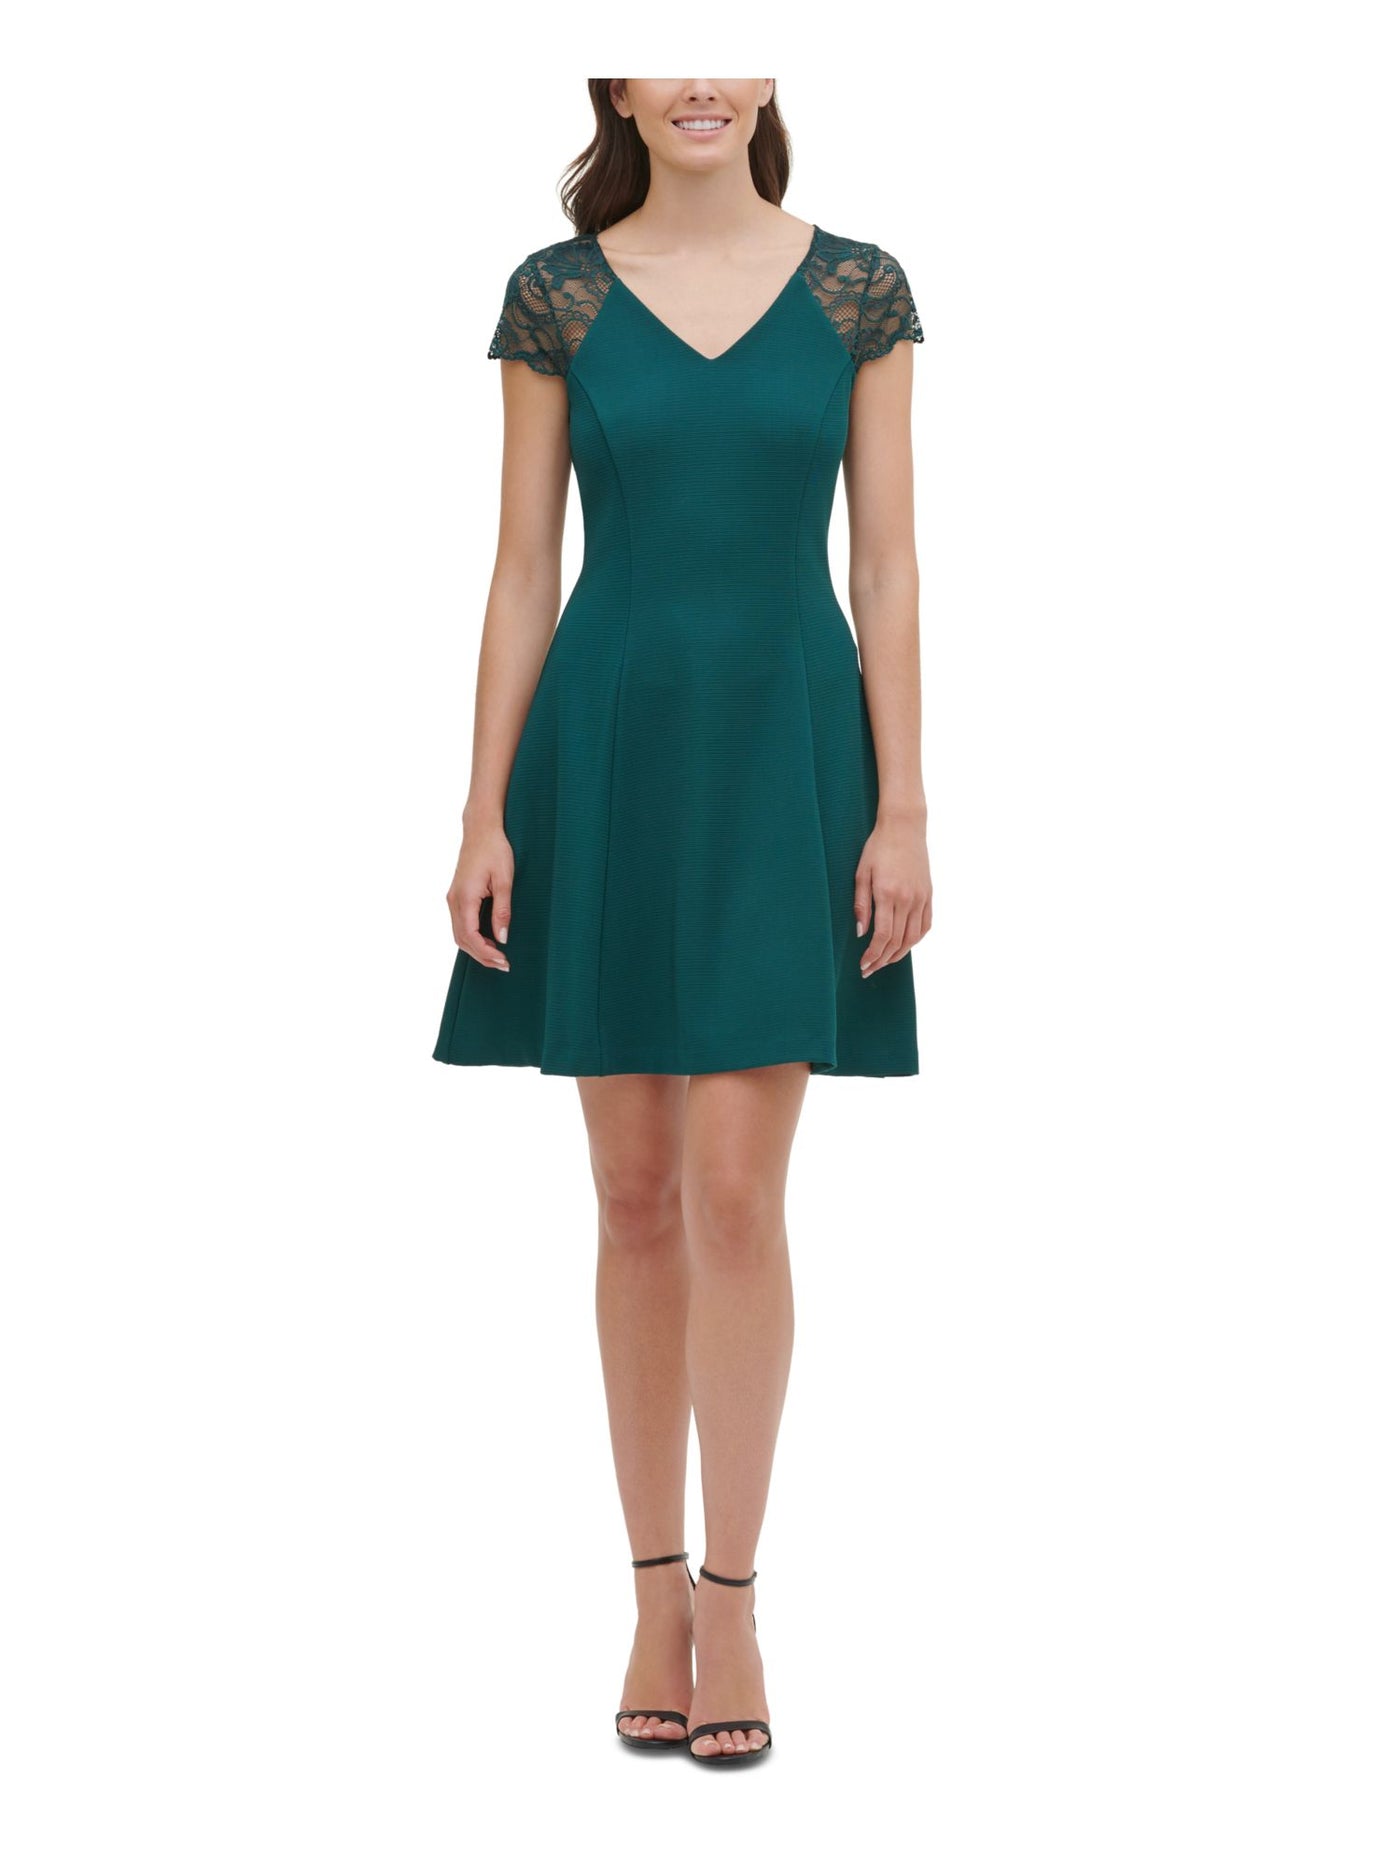 KENSIE Womens Green Stretch Lace Ribbed Zippered Cap Sleeve V Neck Short Party Fit + Flare Dress 14